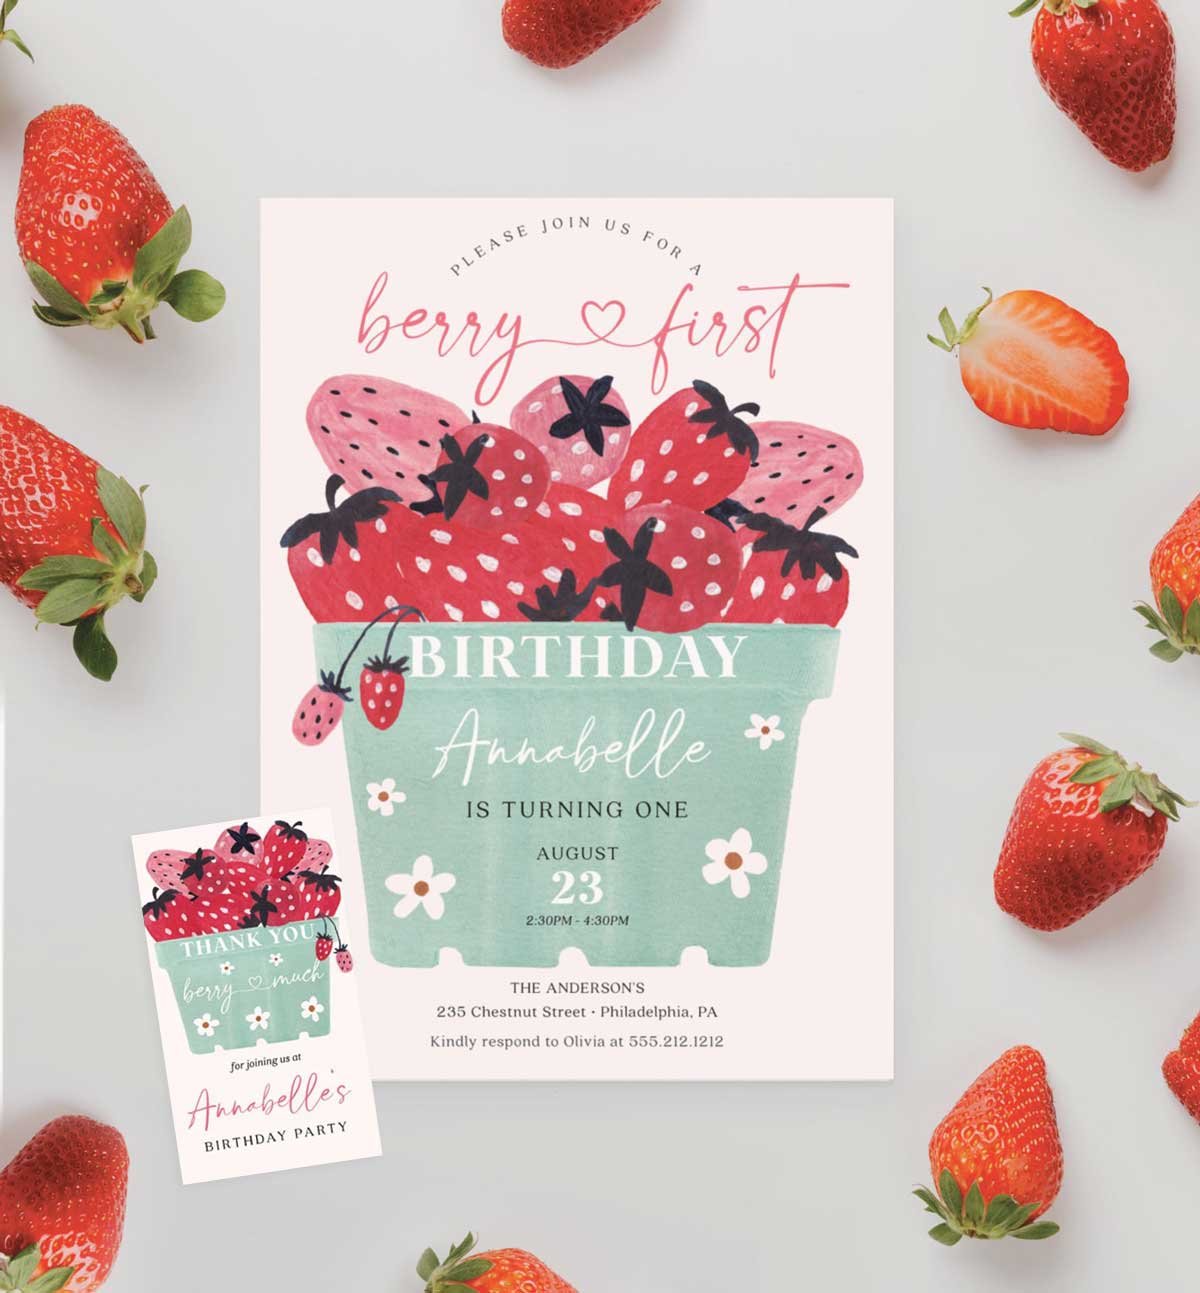 Berry First Birthday Theme / Berry Sweet Strawberry 1st Birthday Invitations, Decorations, Outfits